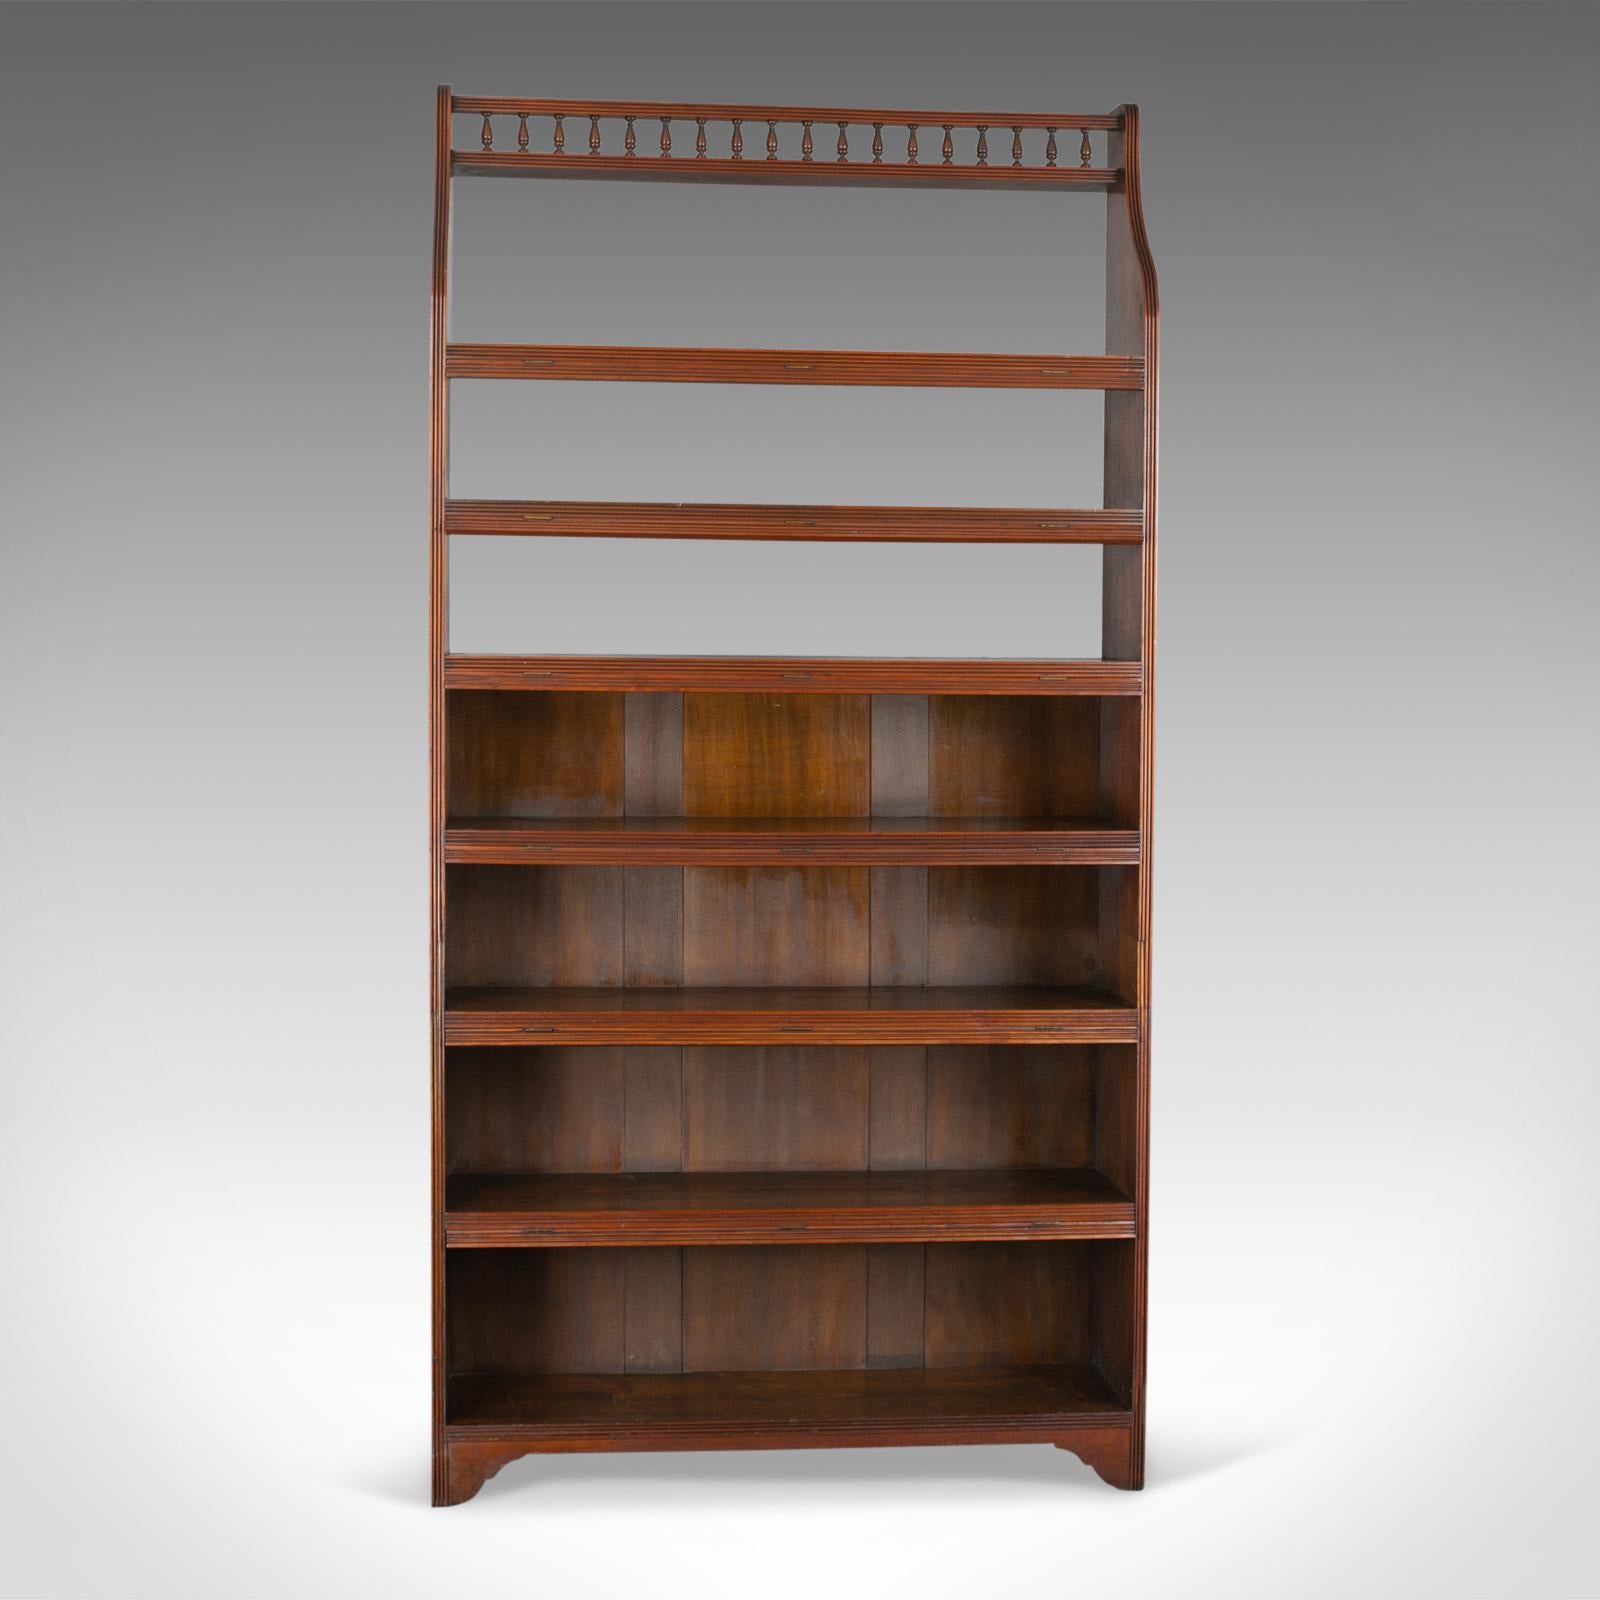 This is an antique open bookcase, tall, English, walnut book shelves. Edwardian, dating to the early 20th century, circa 1910.

Walnut with grain interest in the wax polished finish
Six, graduated shelves featuring hinged dust flaps
Narrow,